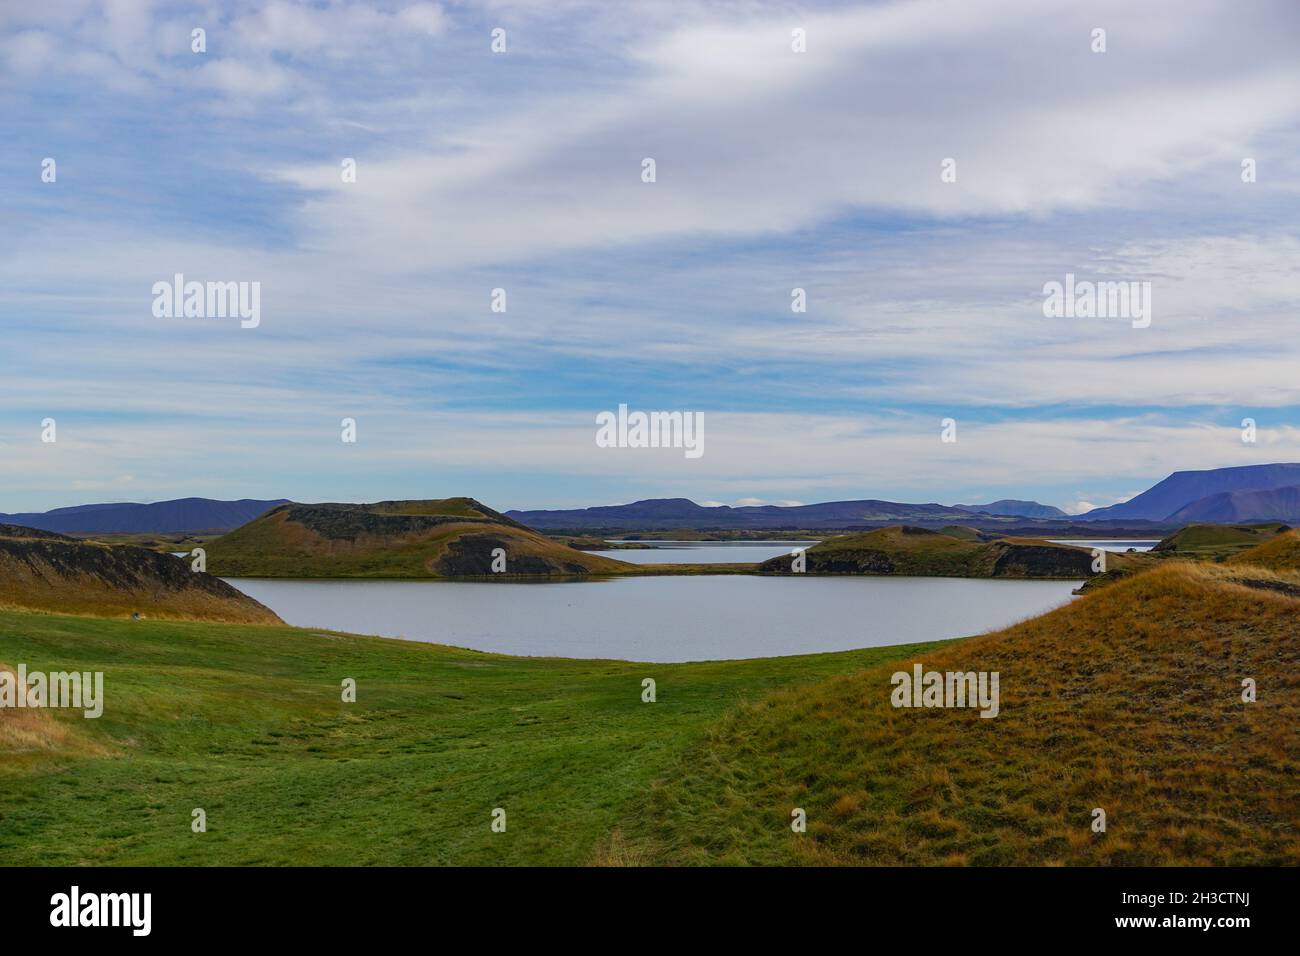 Myvatn, Iceland: A shallow lake situated in an area of active volcanism in the north of Iceland near the Krafla volcano. Stock Photo